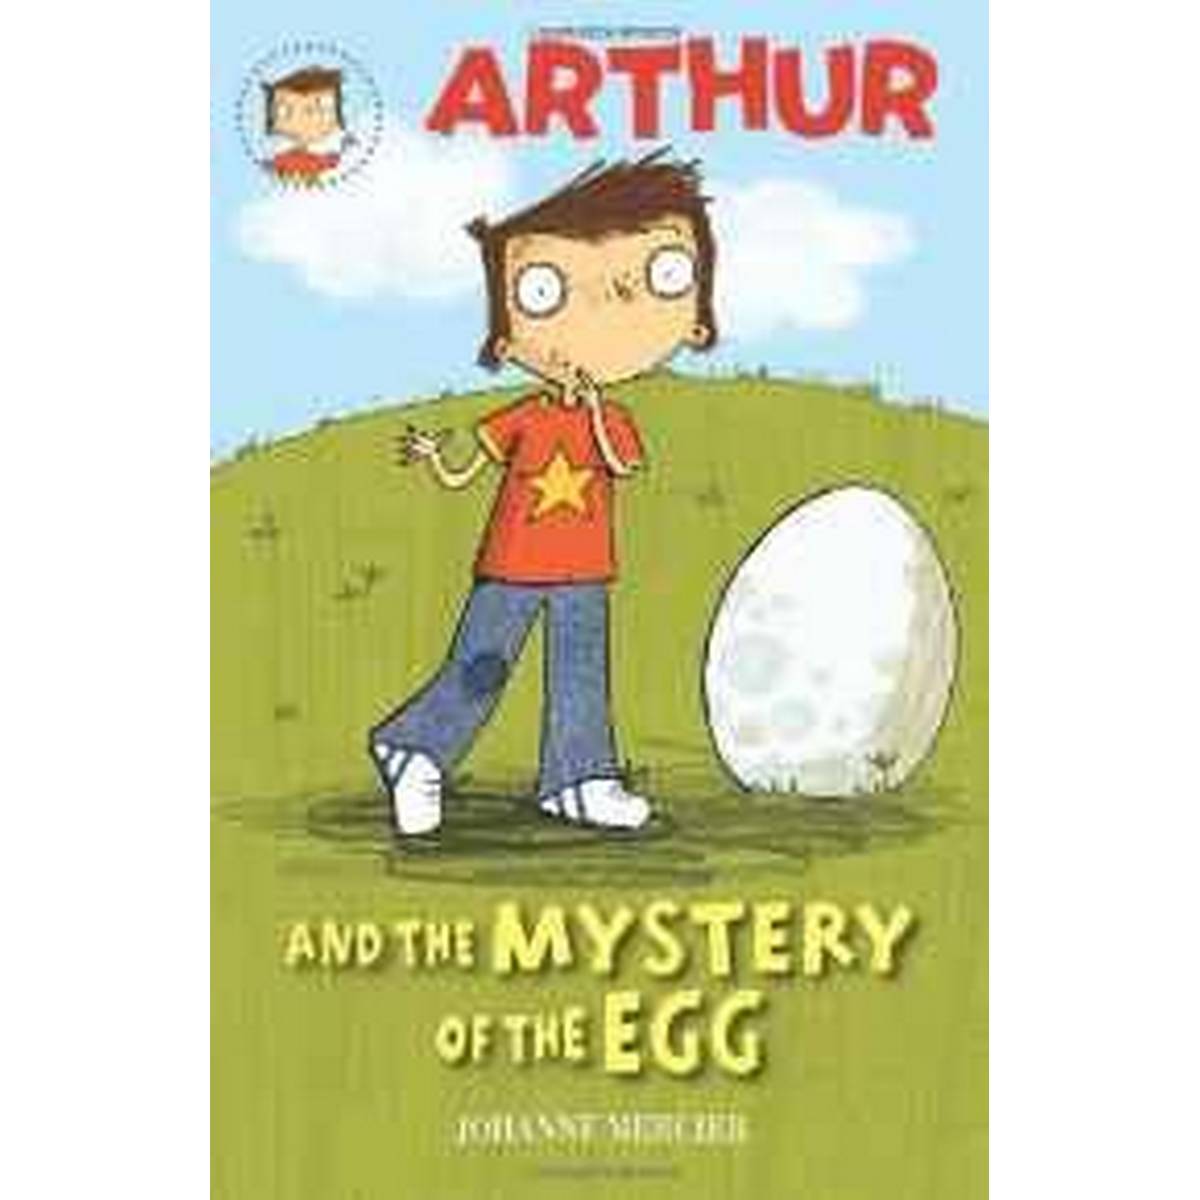 Arthur and the Mystery of the Egg